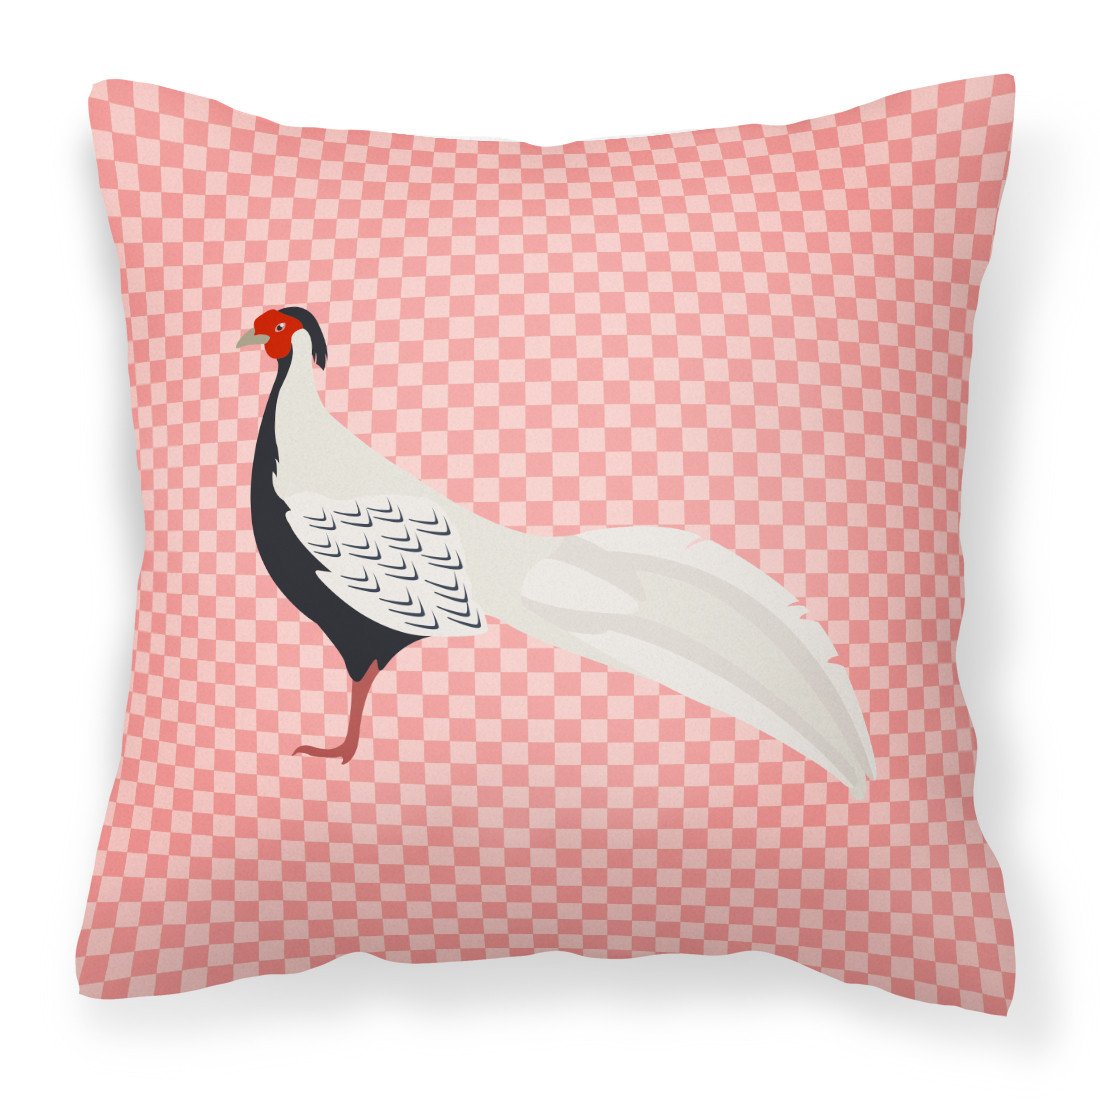 Silver Pheasant Pink Check Fabric Decorative Pillow BB7929PW1818 by Caroline's Treasures